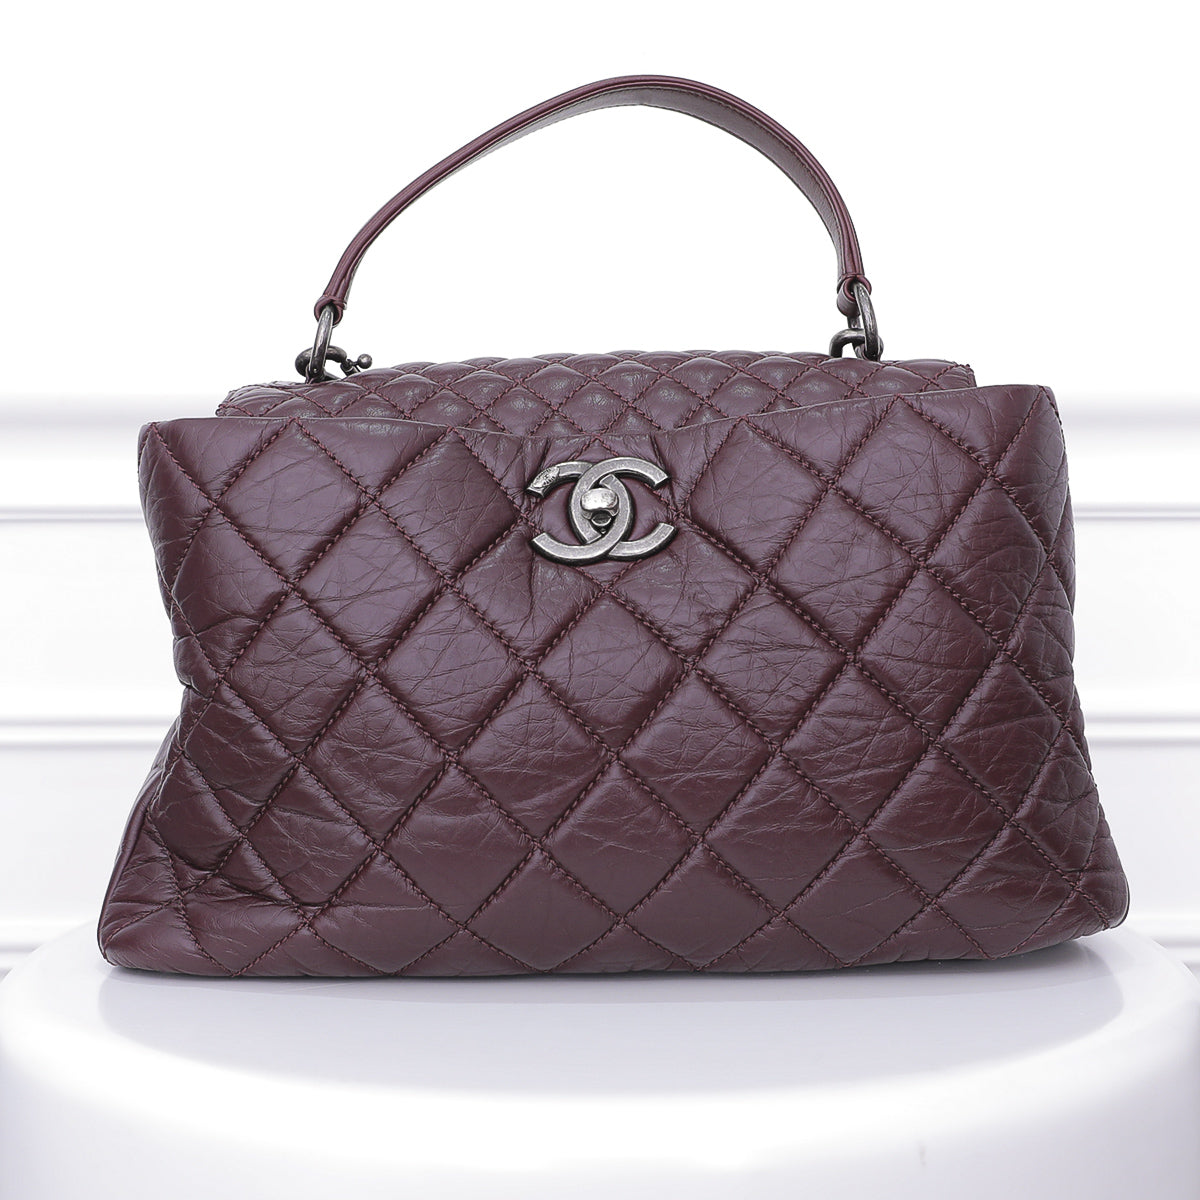 Chanel Burgundy Quilted Top Handle Shopping Bag